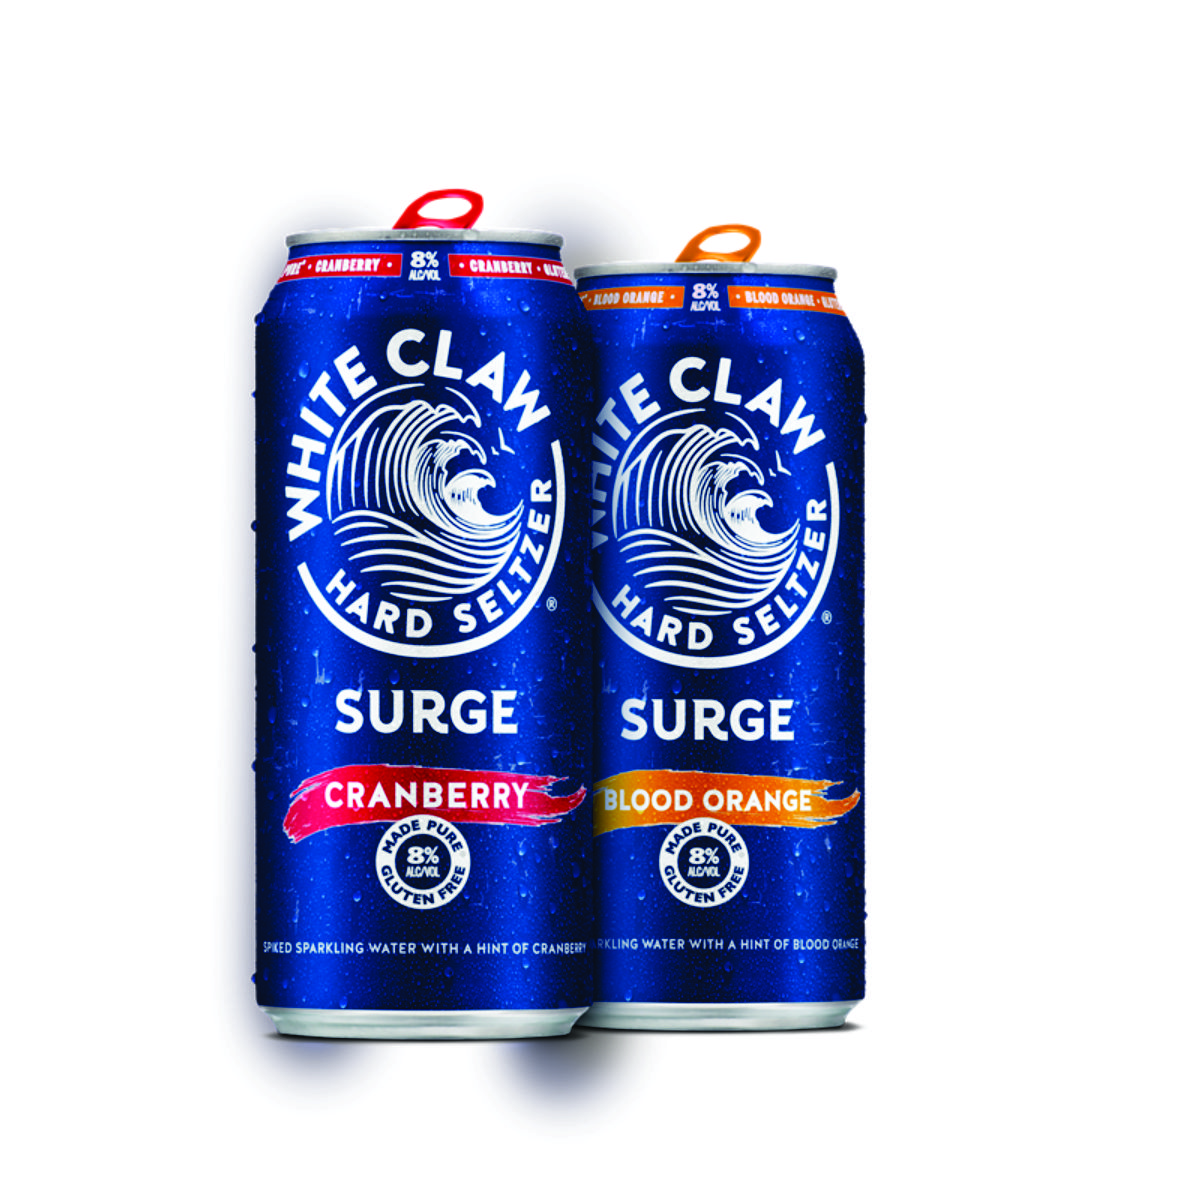 white-claw-surge-finley-beer